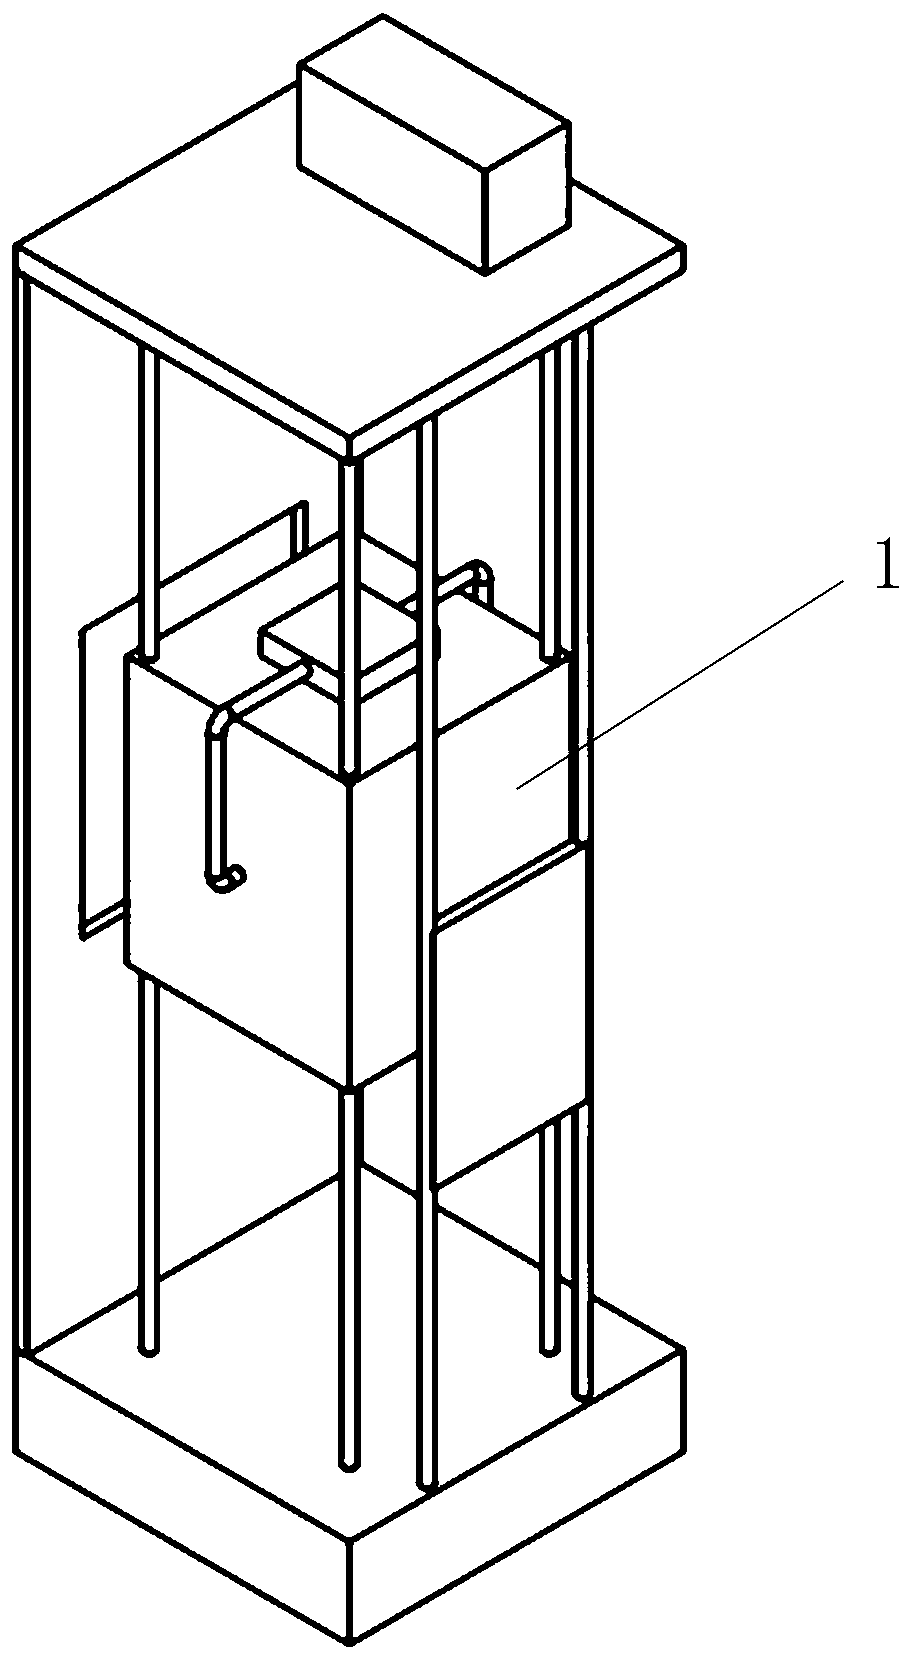 A manually controlled wind elevator